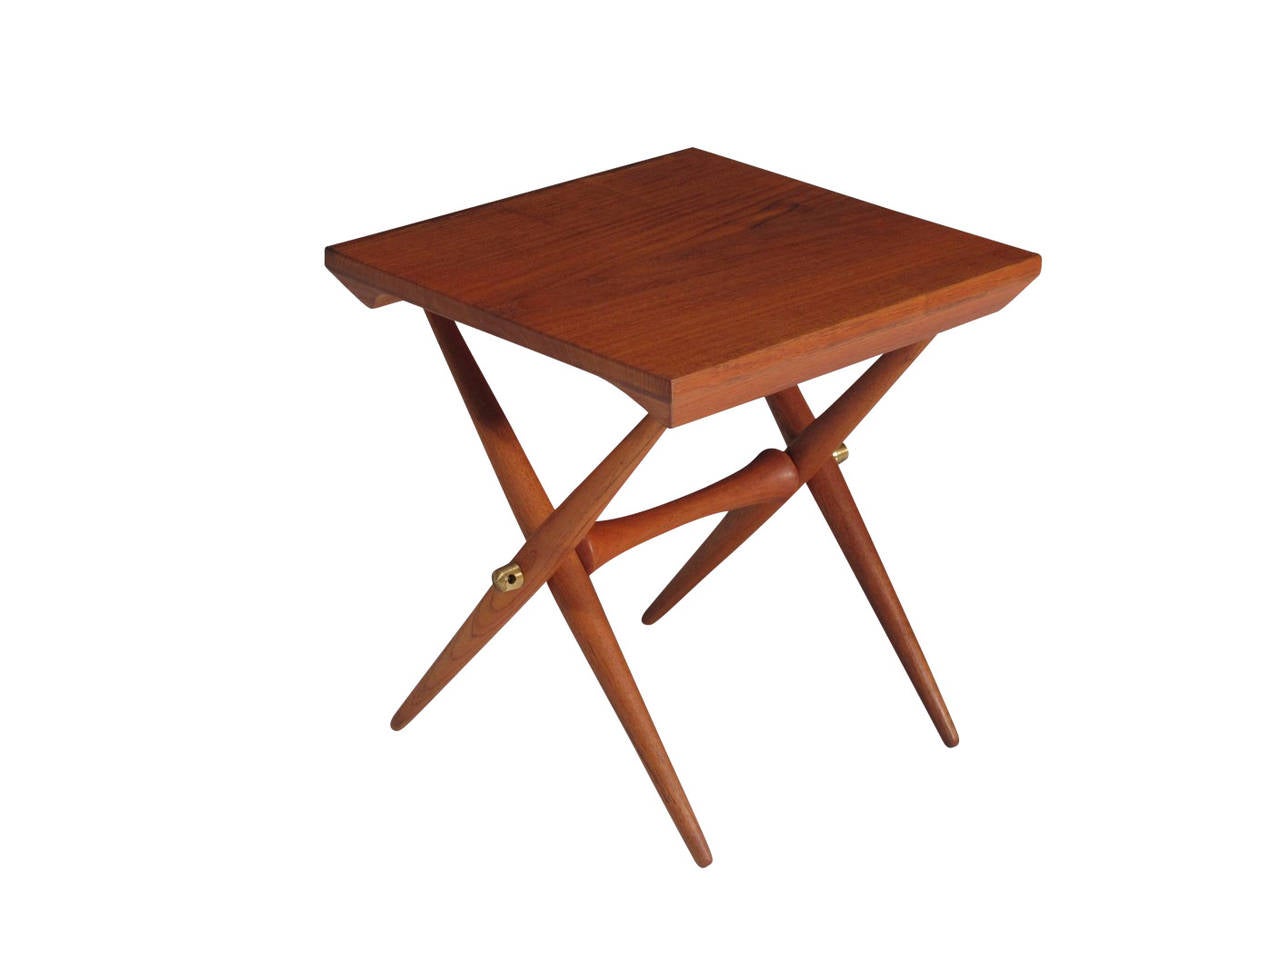 Jens Harald Quistgaard soild-teak "x" base occasional table. Ribbed brass fittings connect the turned stretcher and legs. Stamped with manufacturers mark "JHQ".